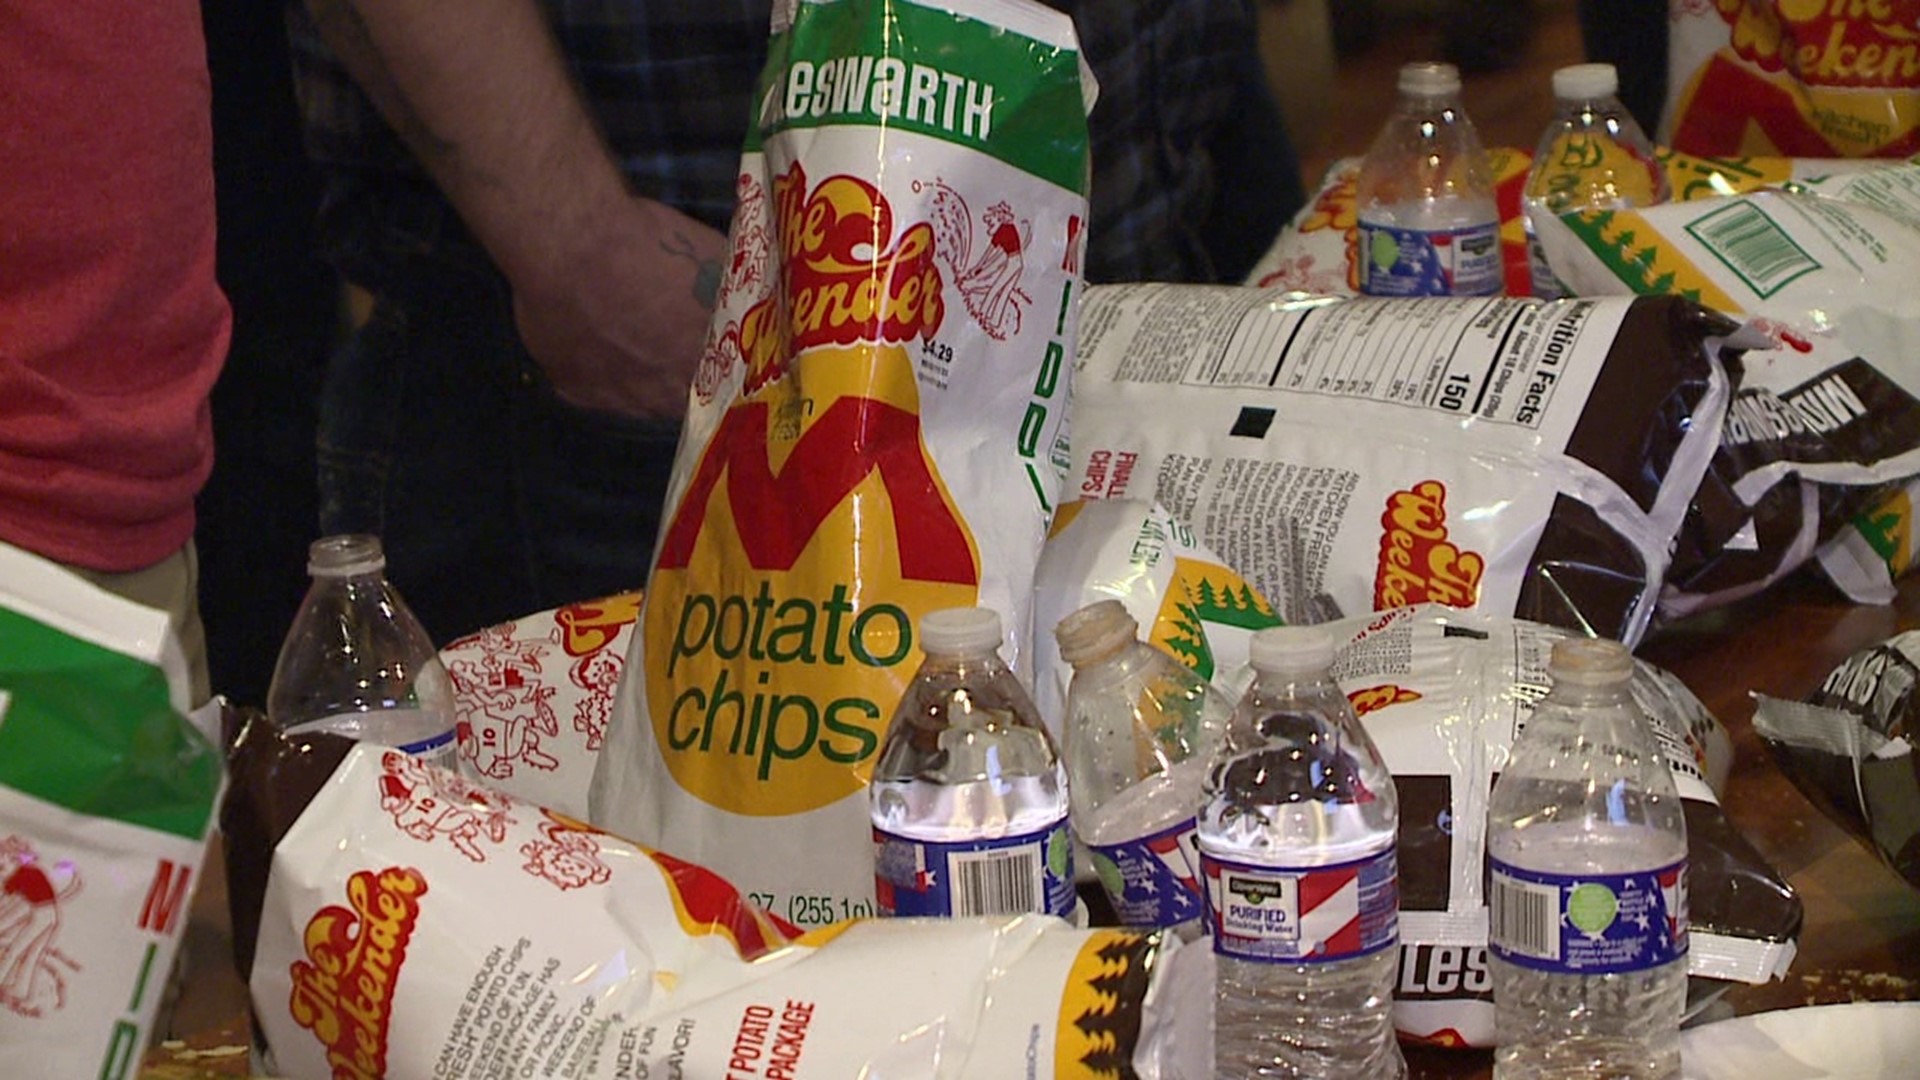 A contest to see who could eat the most Middleswarth potato chips was held at Sabatini's in Exeter Saturday afternoon.